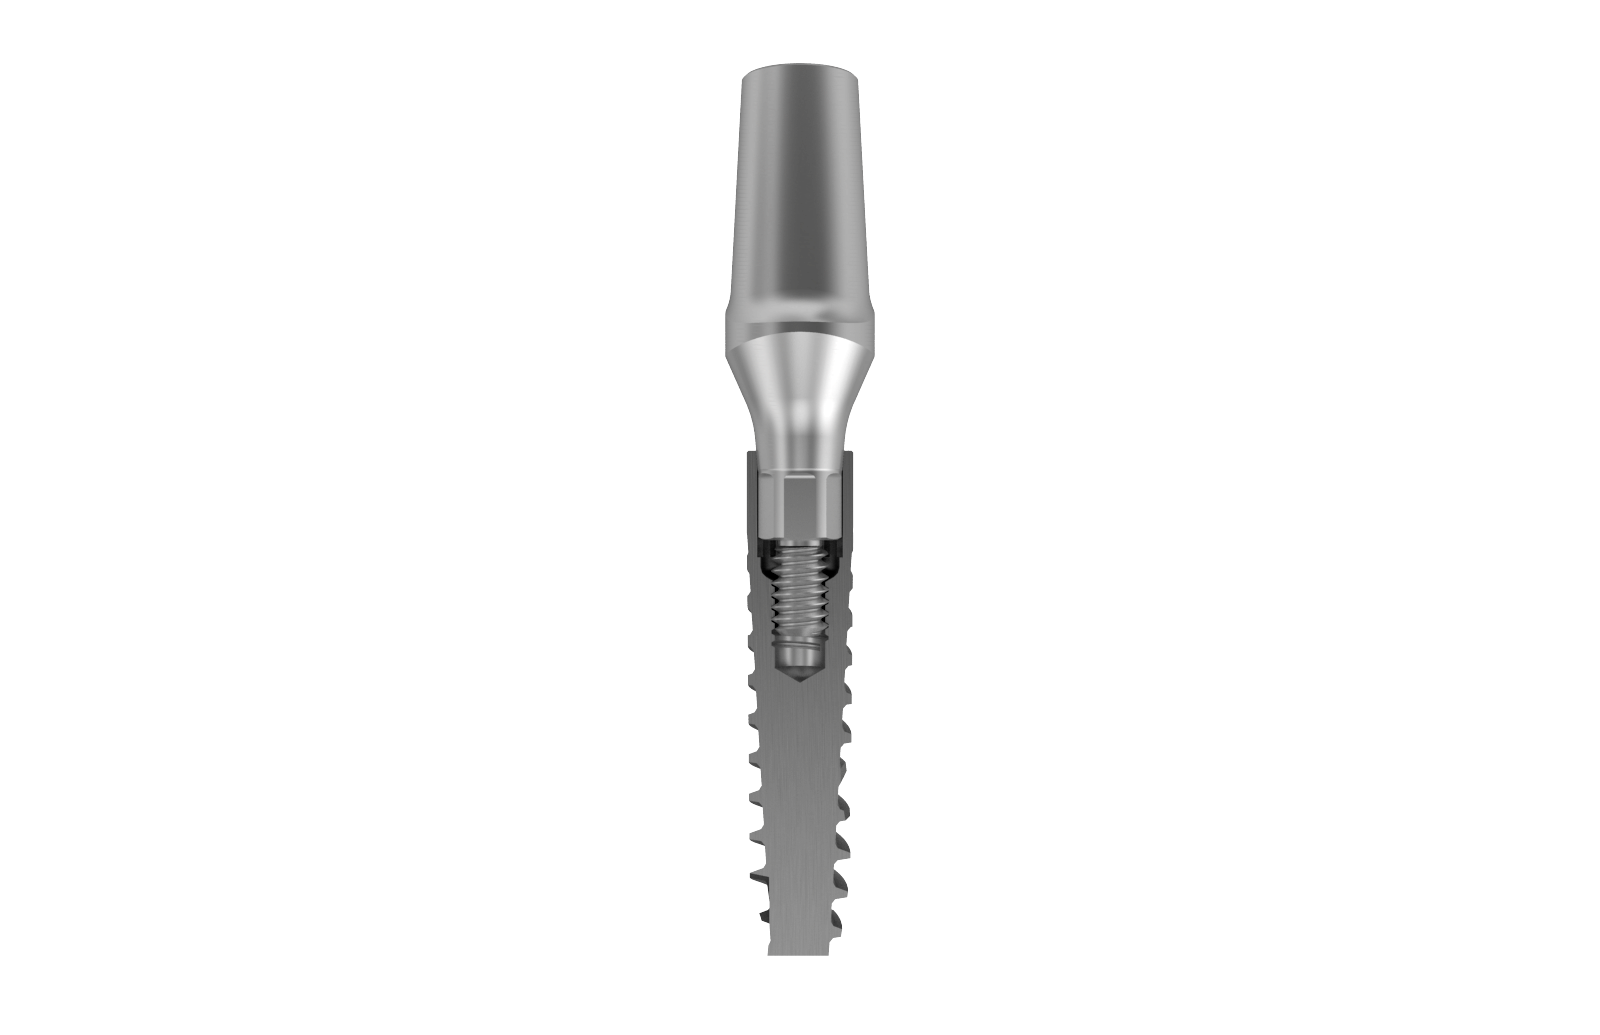 Dental Implant Design – Why Companies Are Investing Heavily in Macro, Micro and Nanotechnology